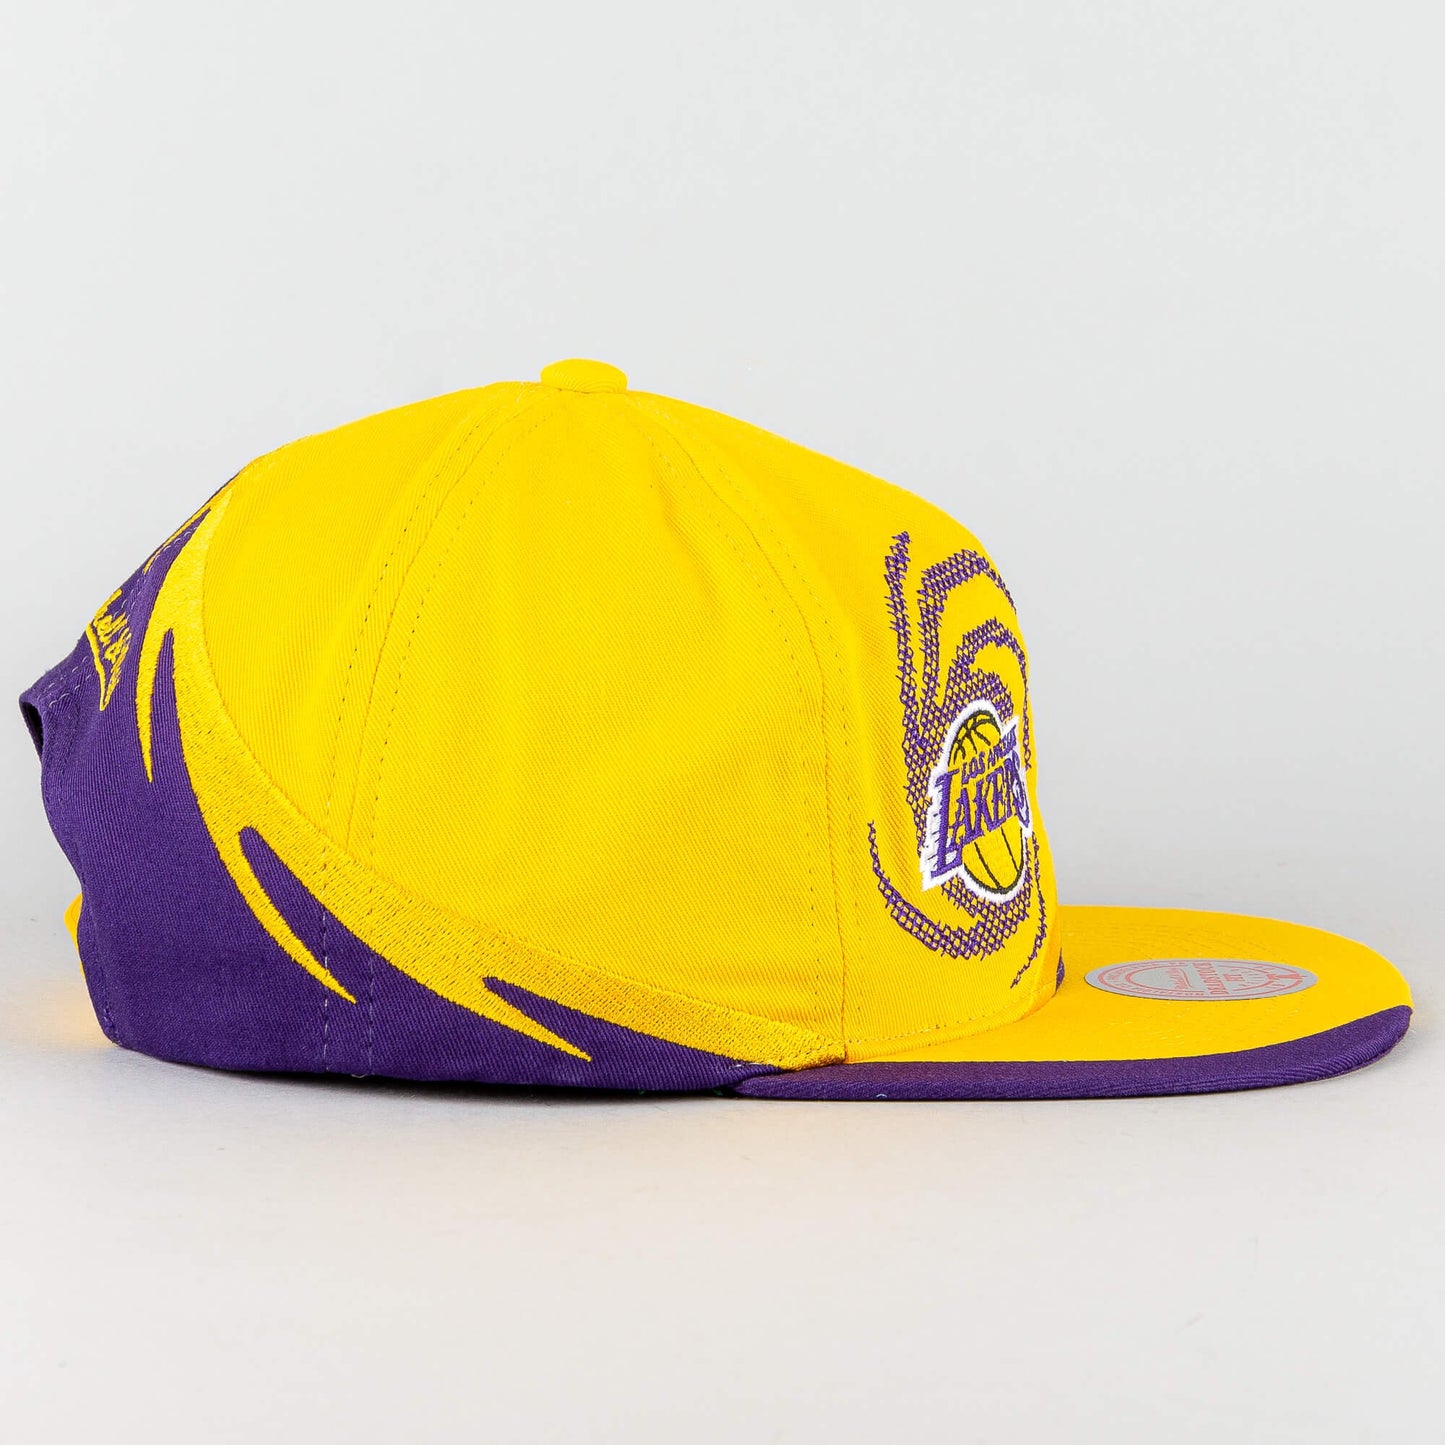 Mitchell & Ness SPIRAL DEADSTOCK SNAPBACK LOS ANGELES LAKERS Yellow